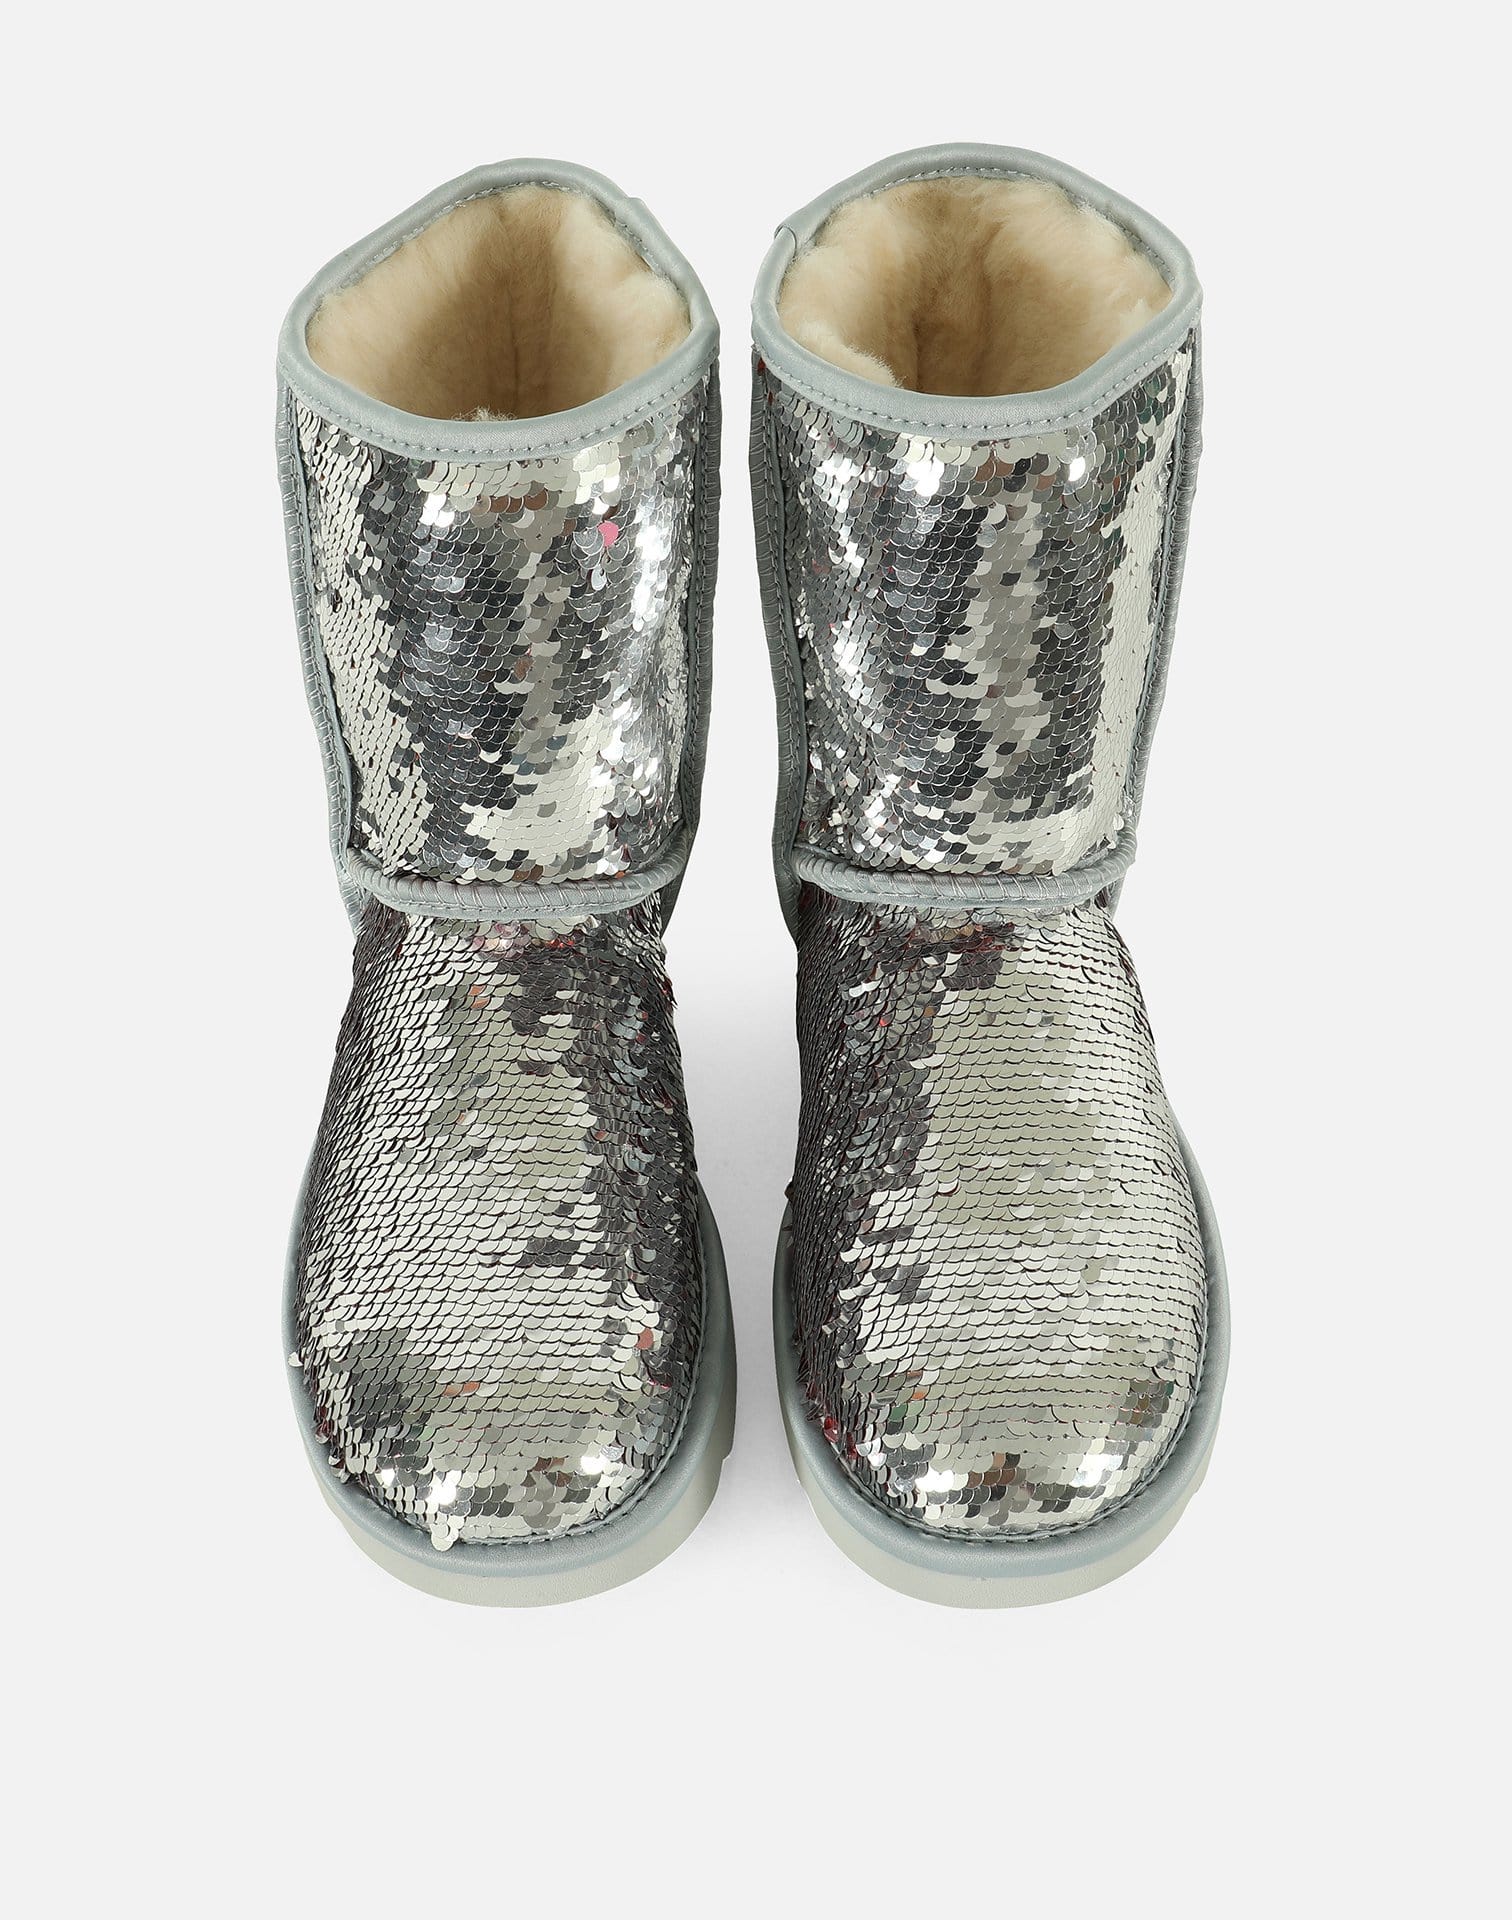 ugg silver sparkle boots